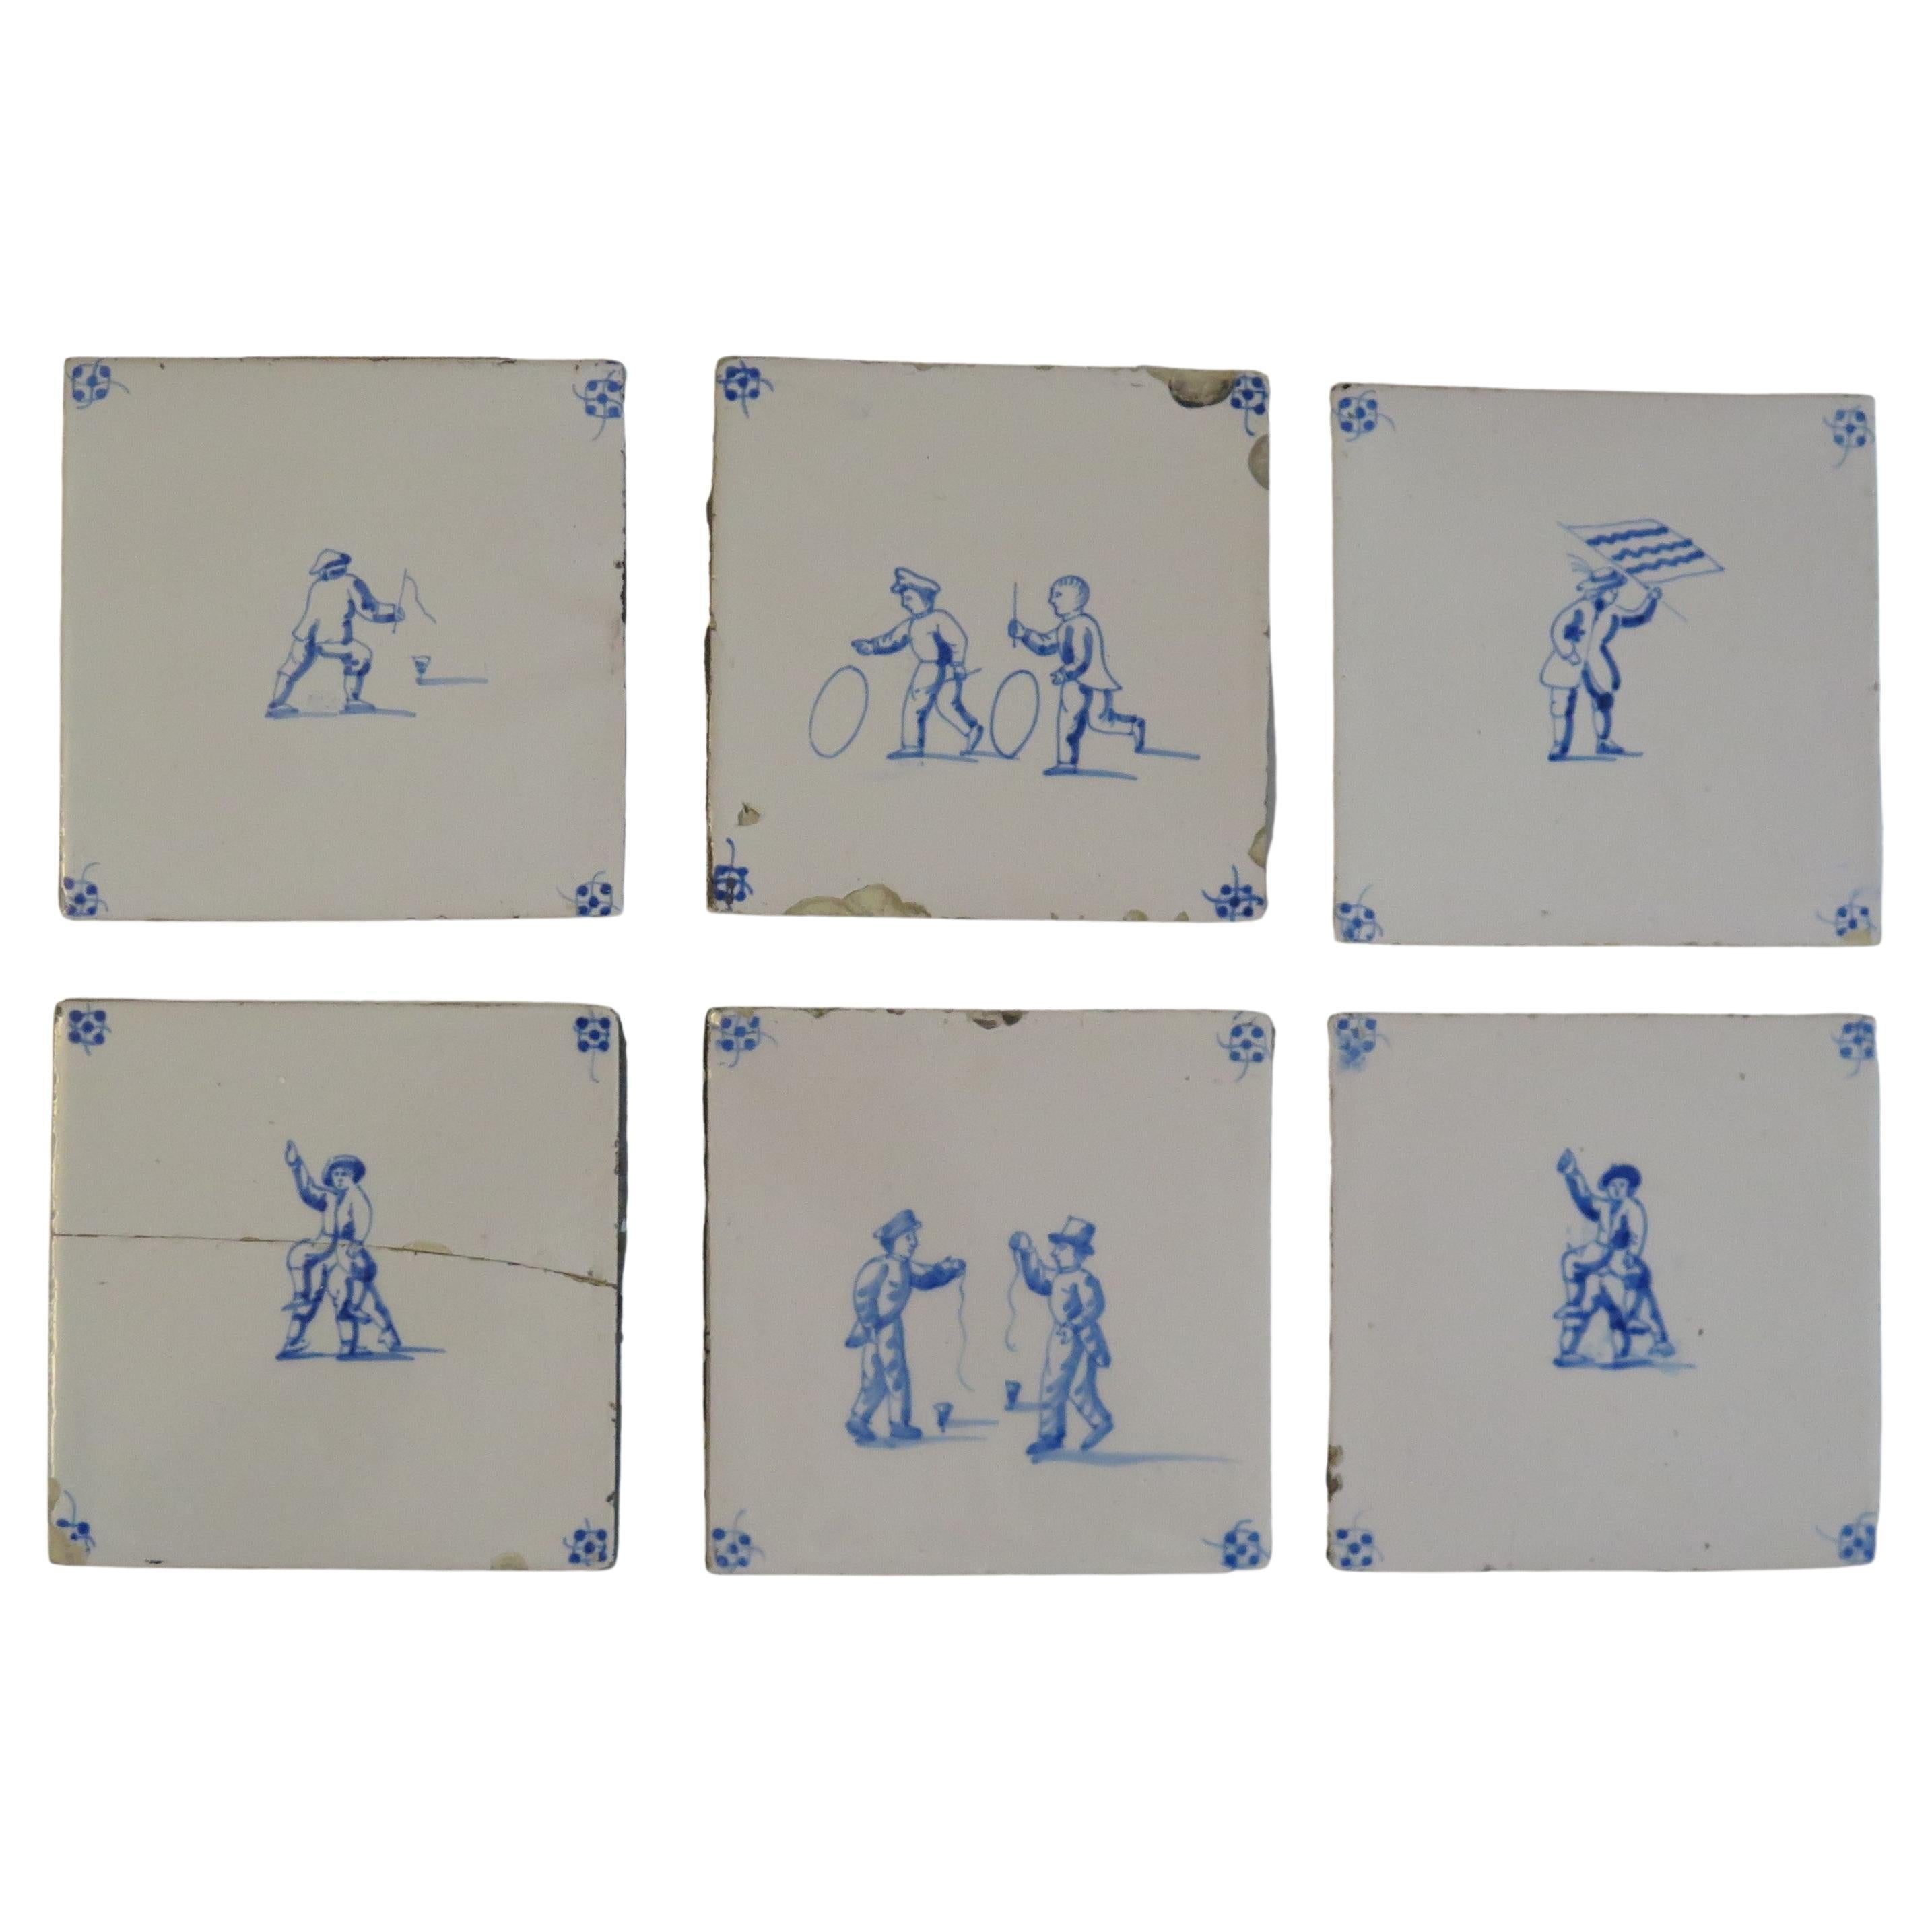 Six Delft Blue and White Tiles All Hand Painted, Dutch, 19th Century